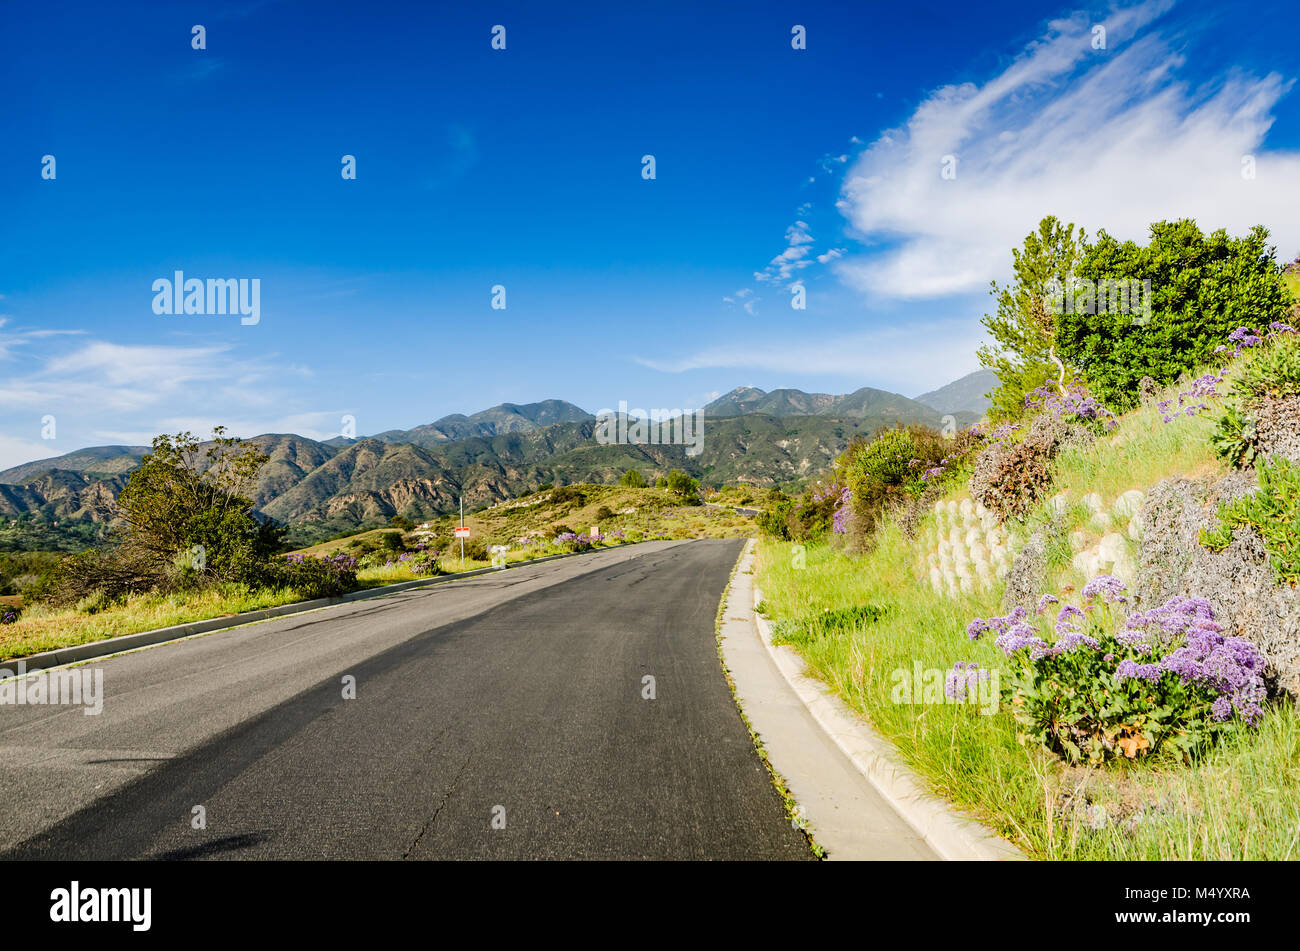 Winding asphalt road amidst spring blooms on hills, canyons, and mountains in Orange County, California. Stock Photo